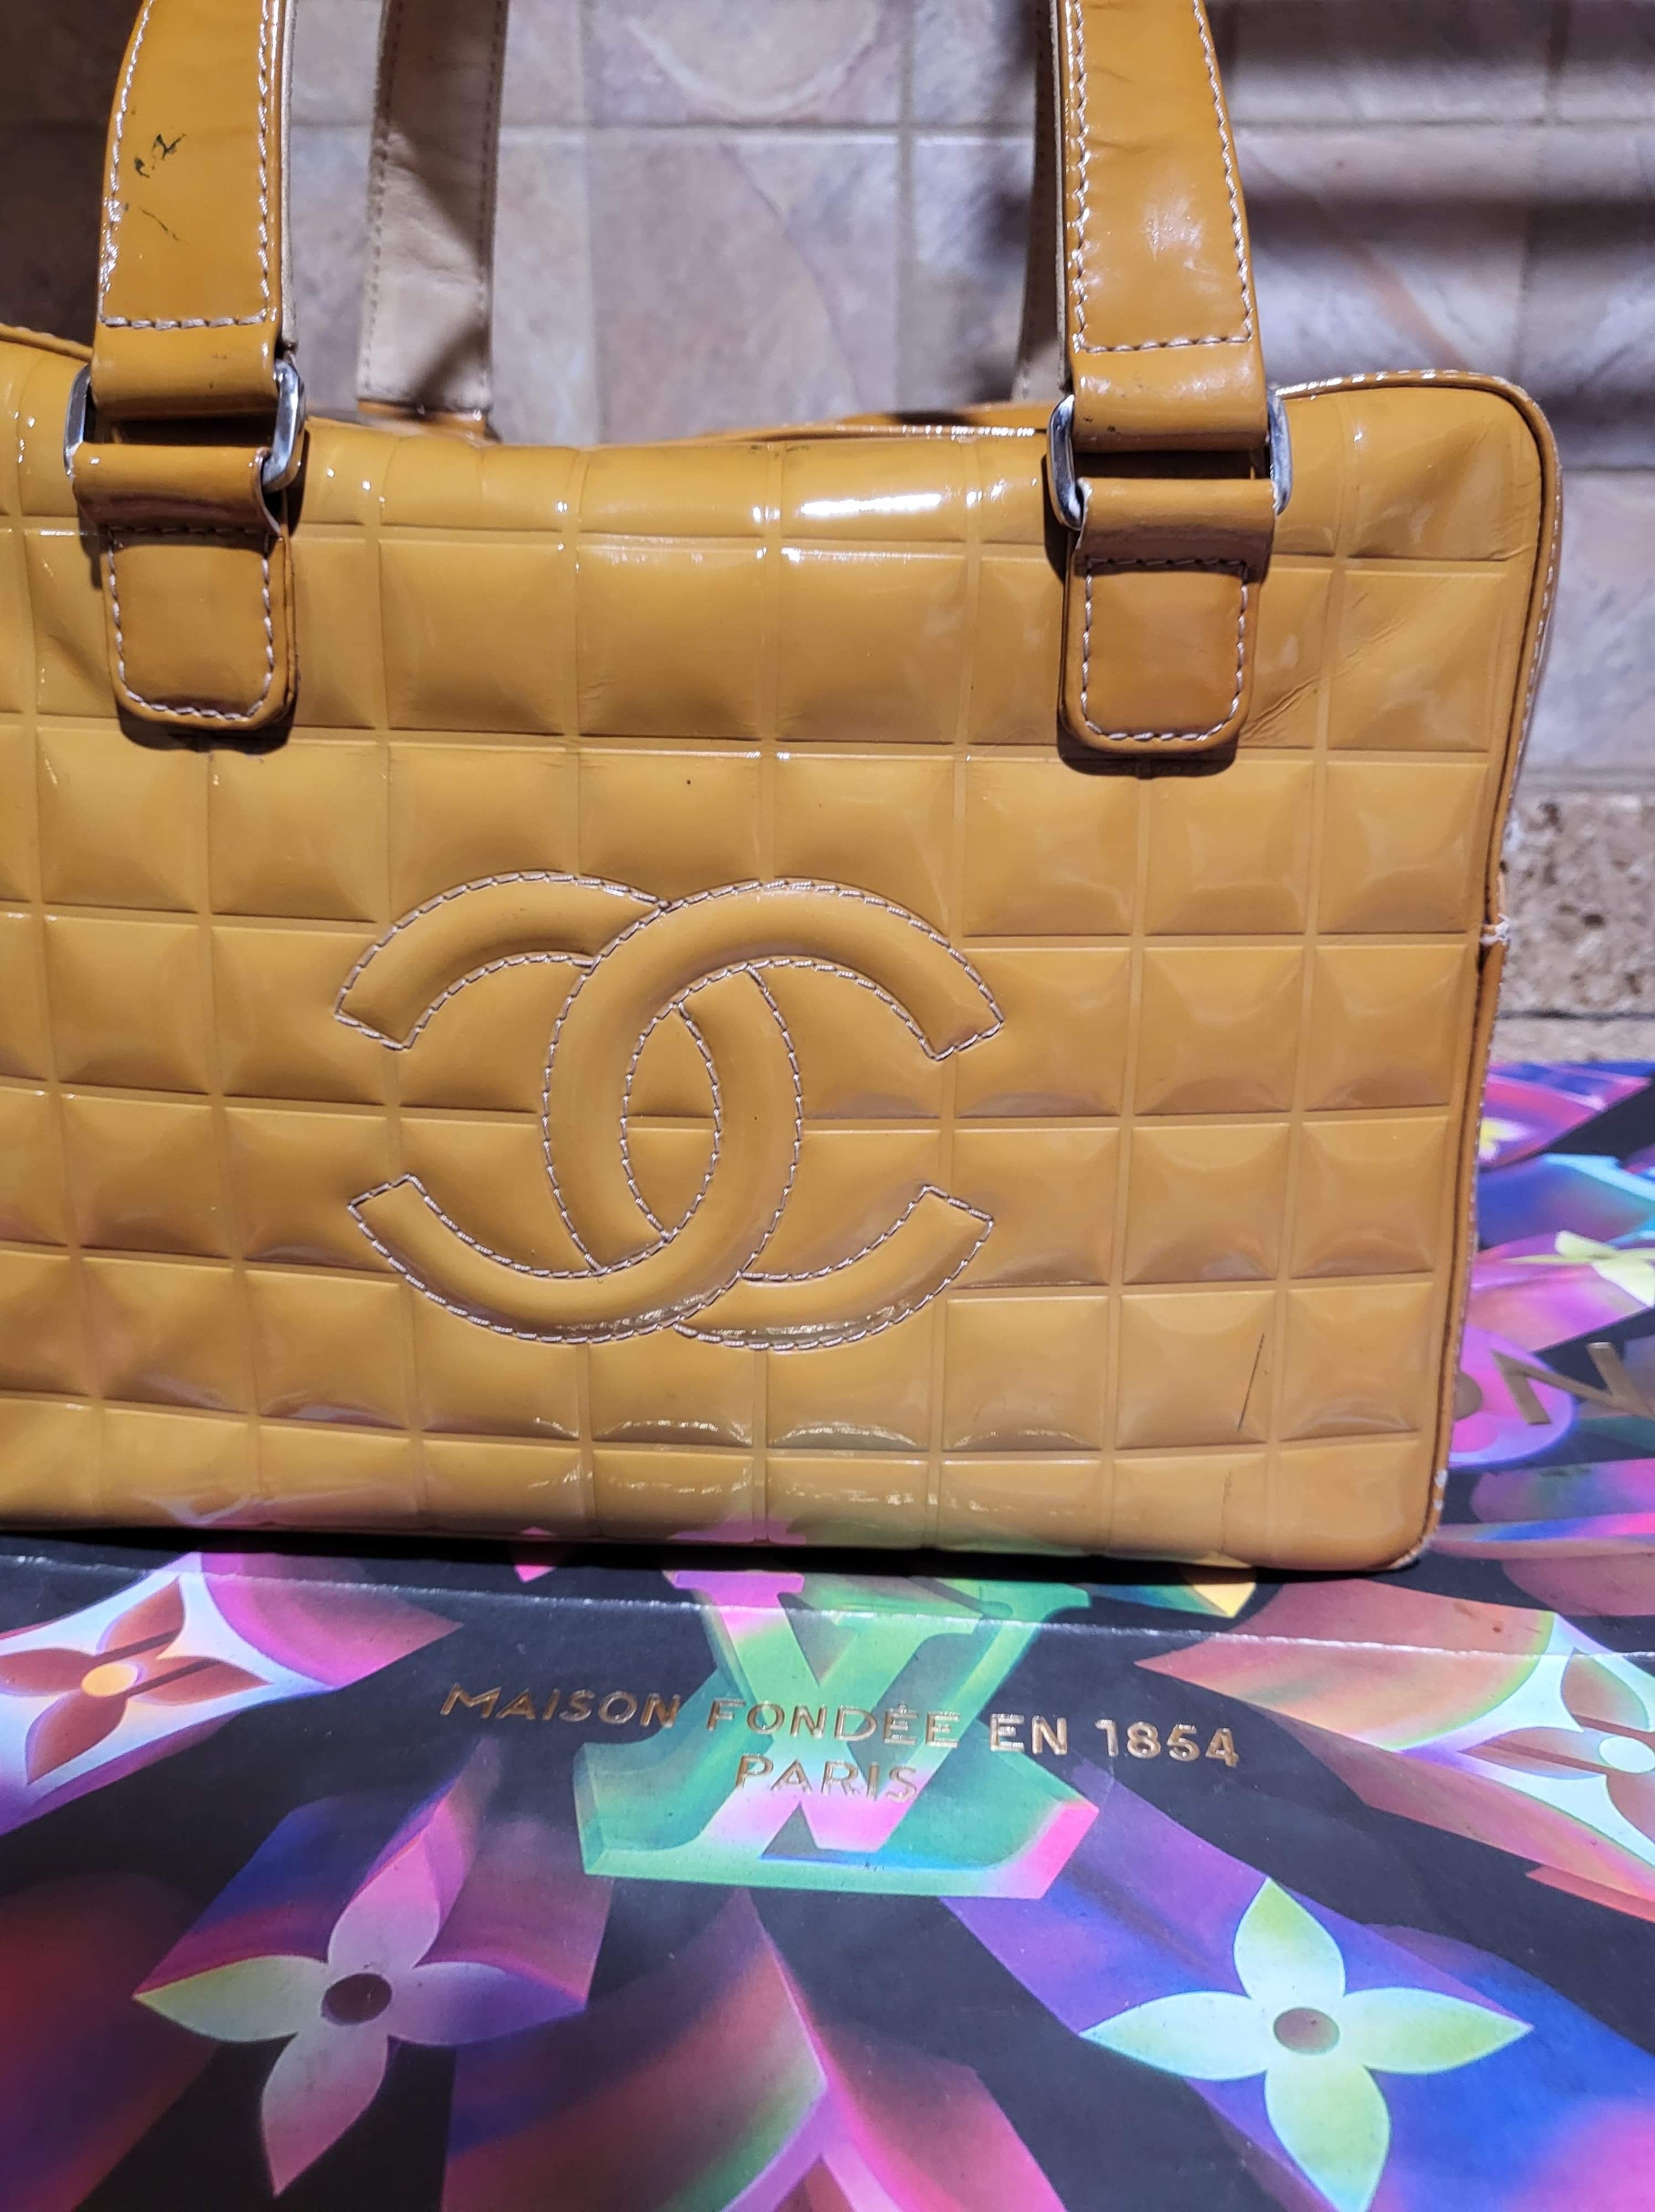 Authentic Chanel Enamel Patient leather handbag – The Neon Gypsy Shopping